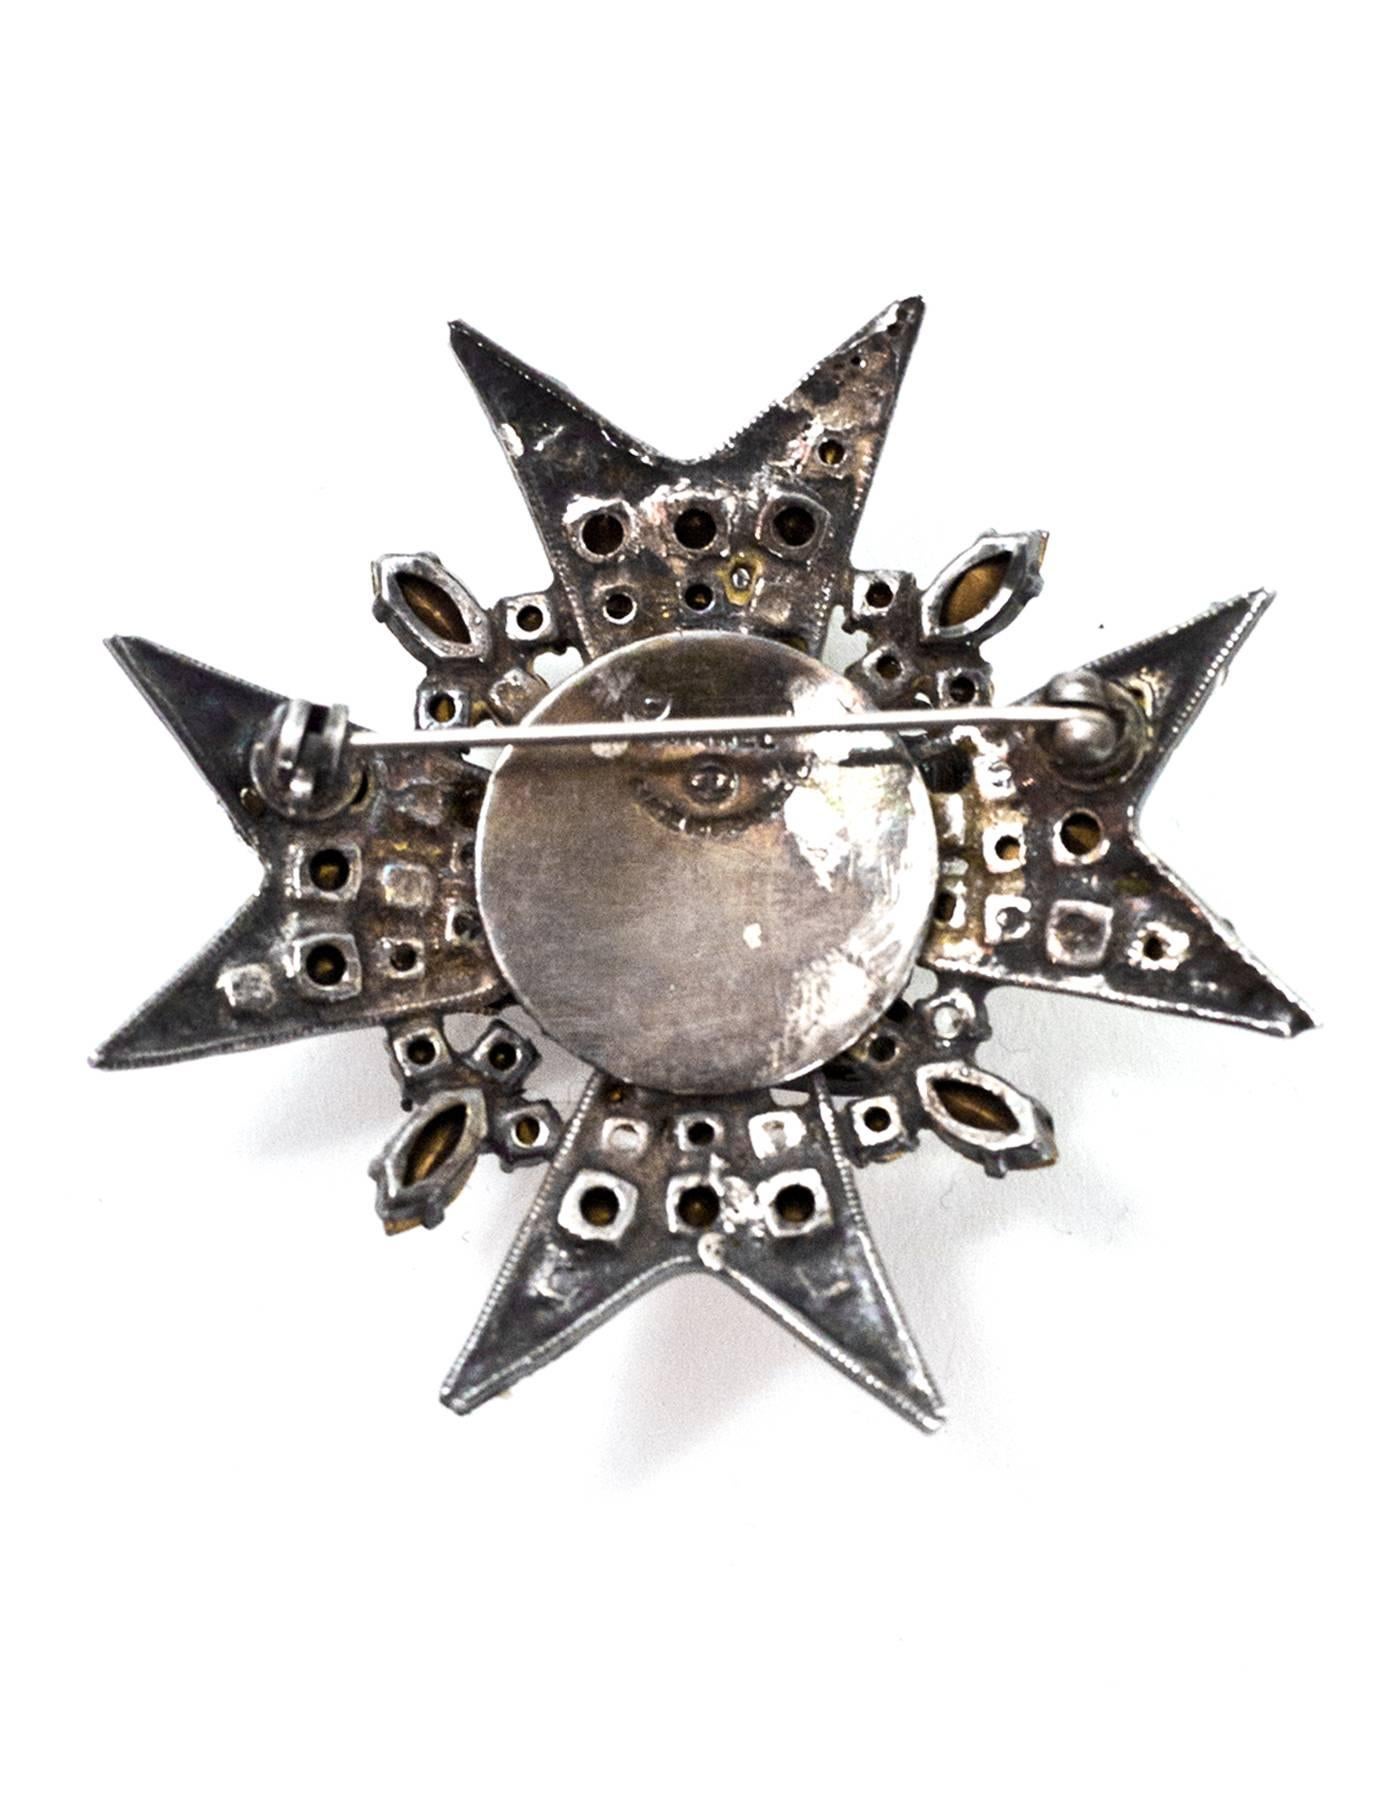 Chanel Vintage Rhinestone Star & Bird Brooch
Made in: France
Year of Production: 1970's-1980's
Color: Silvertone
Materials: Metal and rhinestones
Closure: Pin back closure
Stamp: Chanel CC Made in France
Overall Condition: Good vintage condition